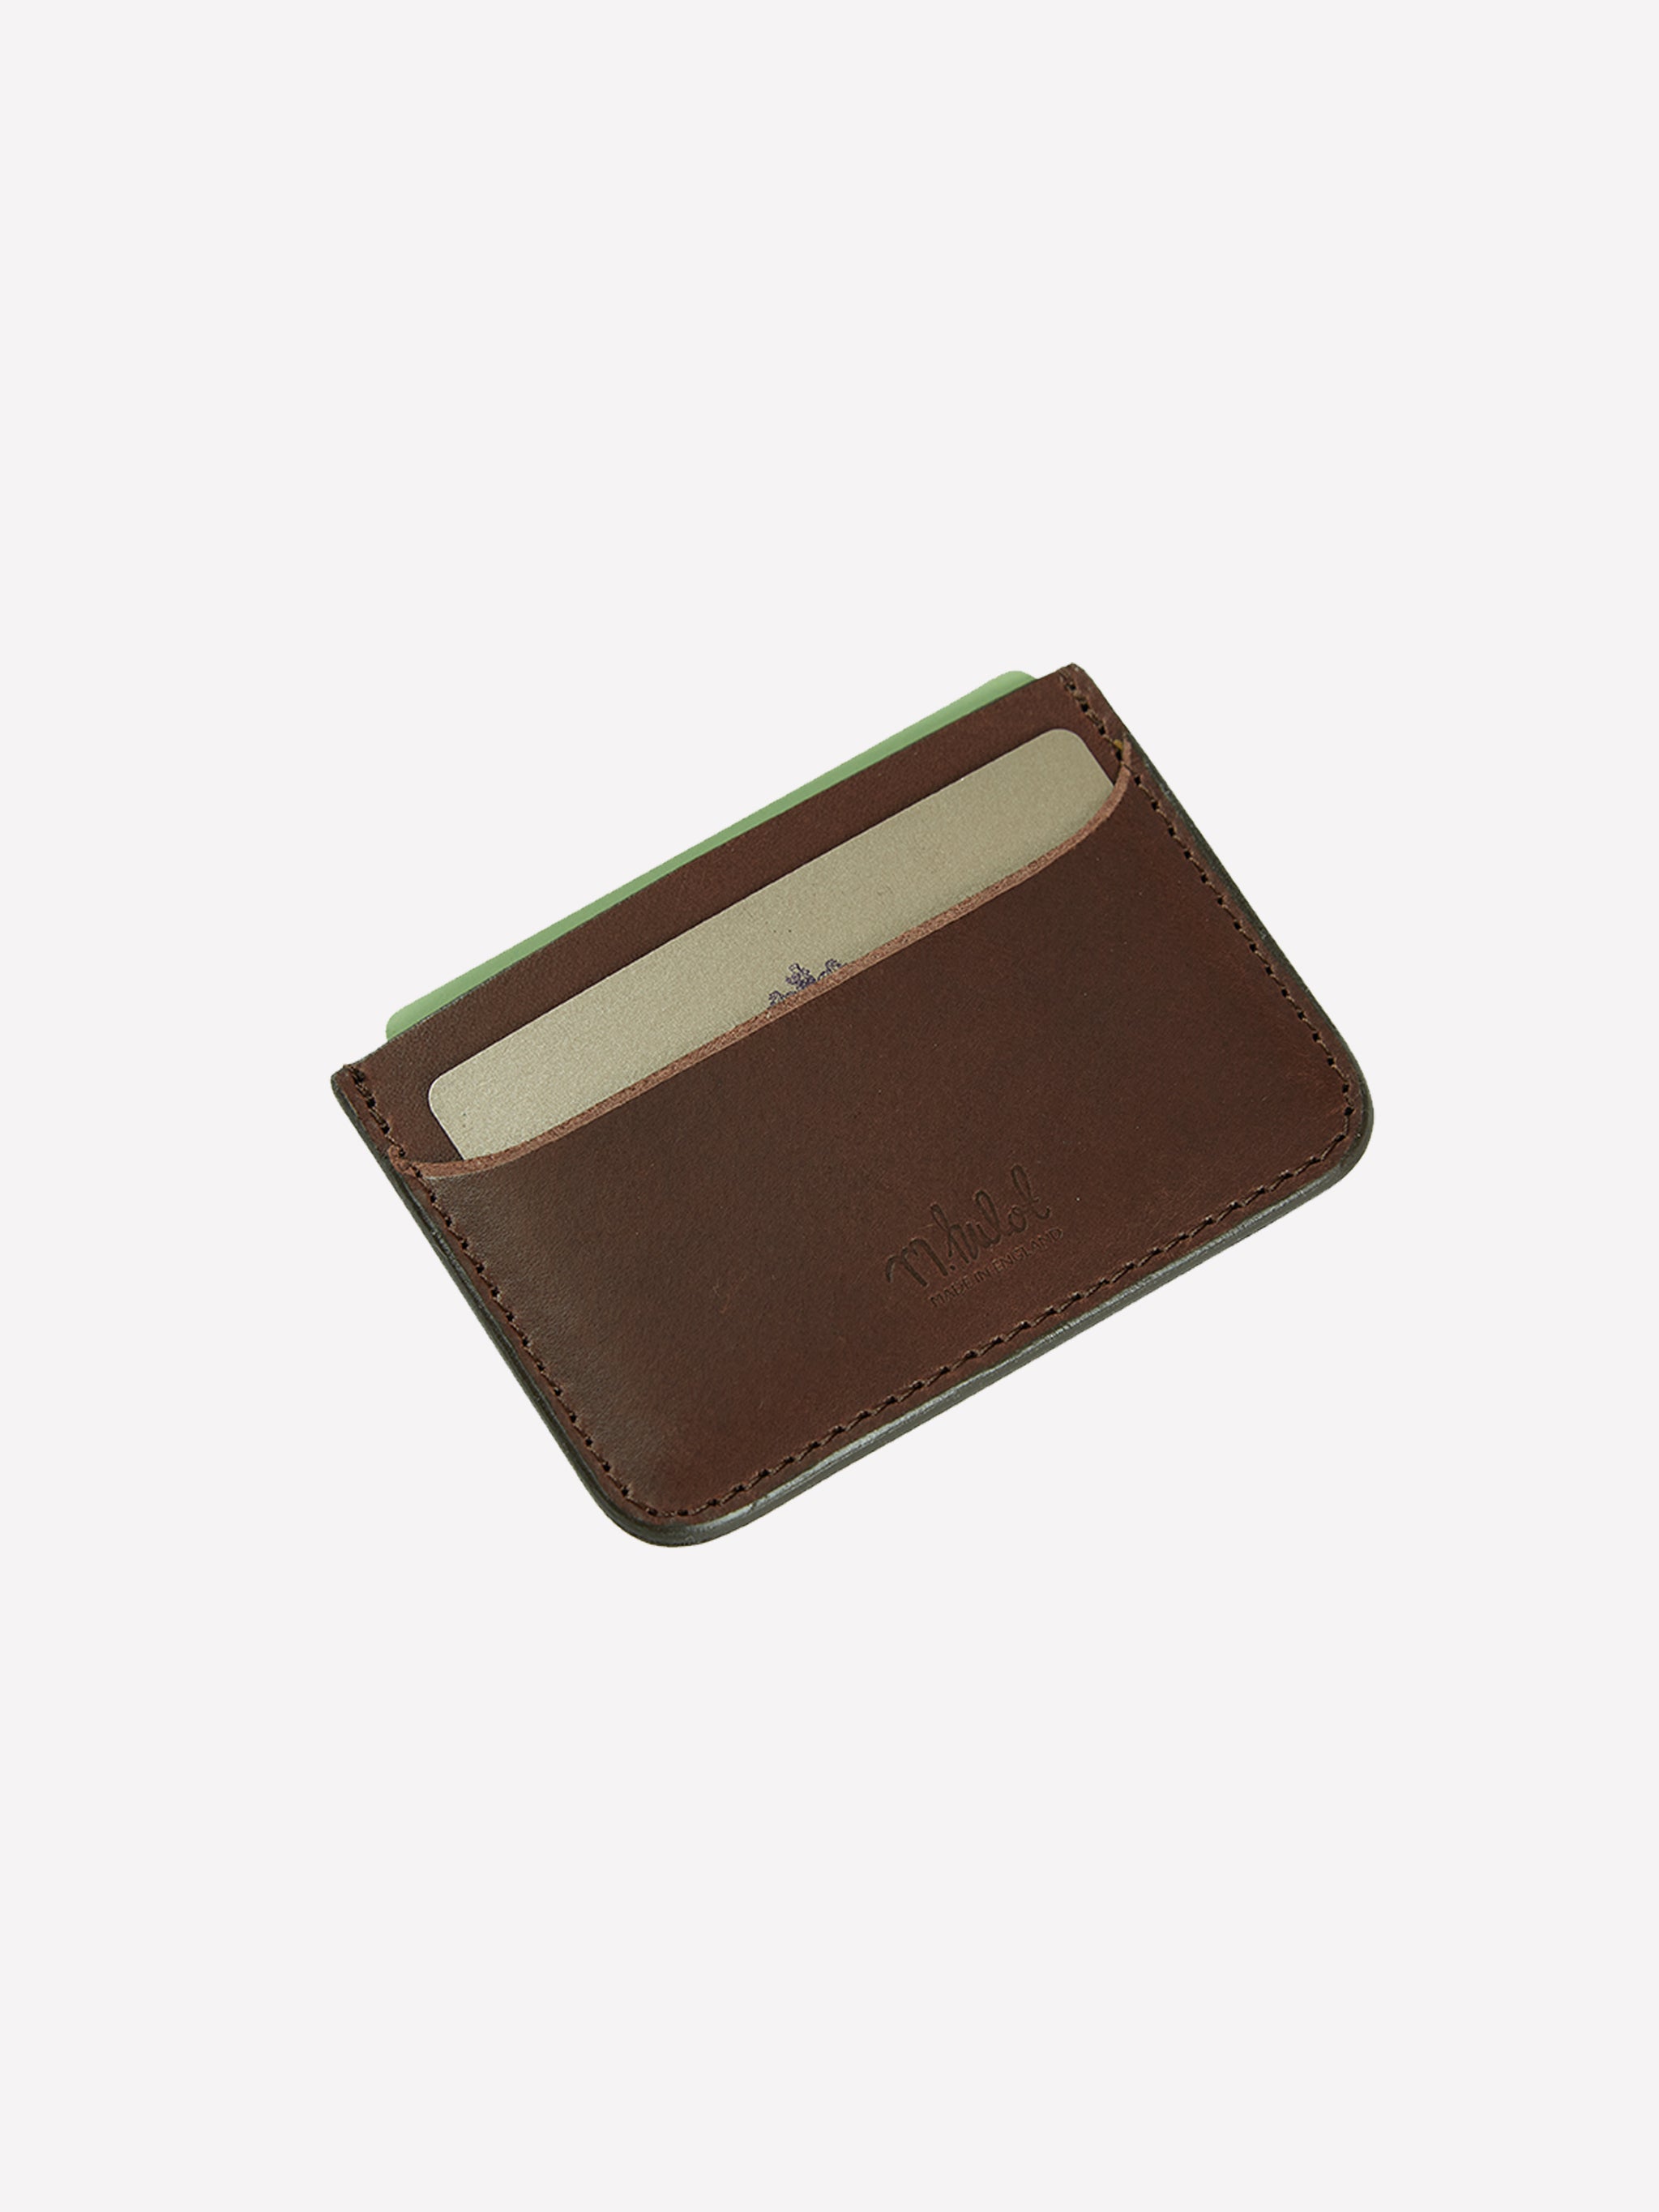 Socon Crafted Leather Cardholder - Chocolate